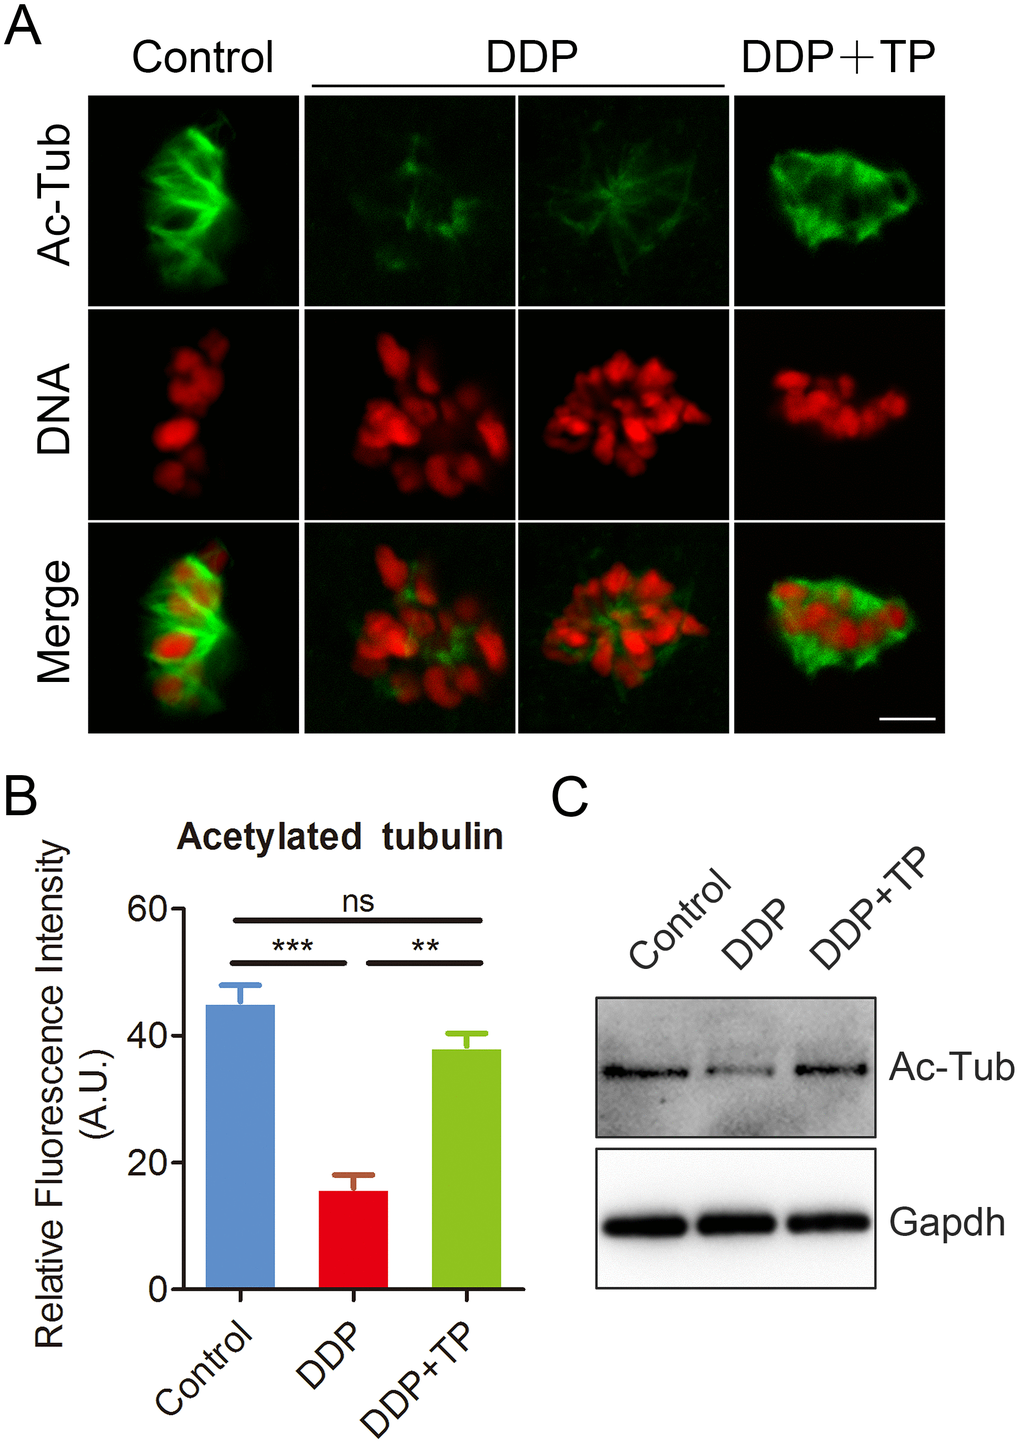 Effects of TP on the acetylation level of α-tubulin in DDP-exposed porcine oocytes. (A) Representative images of acetylated α-tubulin in control, DDP-exposed and TP-supplemented oocytes. Scale bar, 5 μm. (B) Quantitative analysis of the fluorescence intensity of acetylated α-tubulin in control, DDP-exposed and TP-supplemented oocytes. (C) The acetylation levels of α-tubulin were detected by Immunoblotting in control, DDP-exposed and TP-supplemented oocytes. The blots were probed with anti-acetyl-α-tubulin and anti-Gapdh antibodies, respectively. Data were presented as mean percentage (mean ± SEM) of at least three independent experiments. **P 